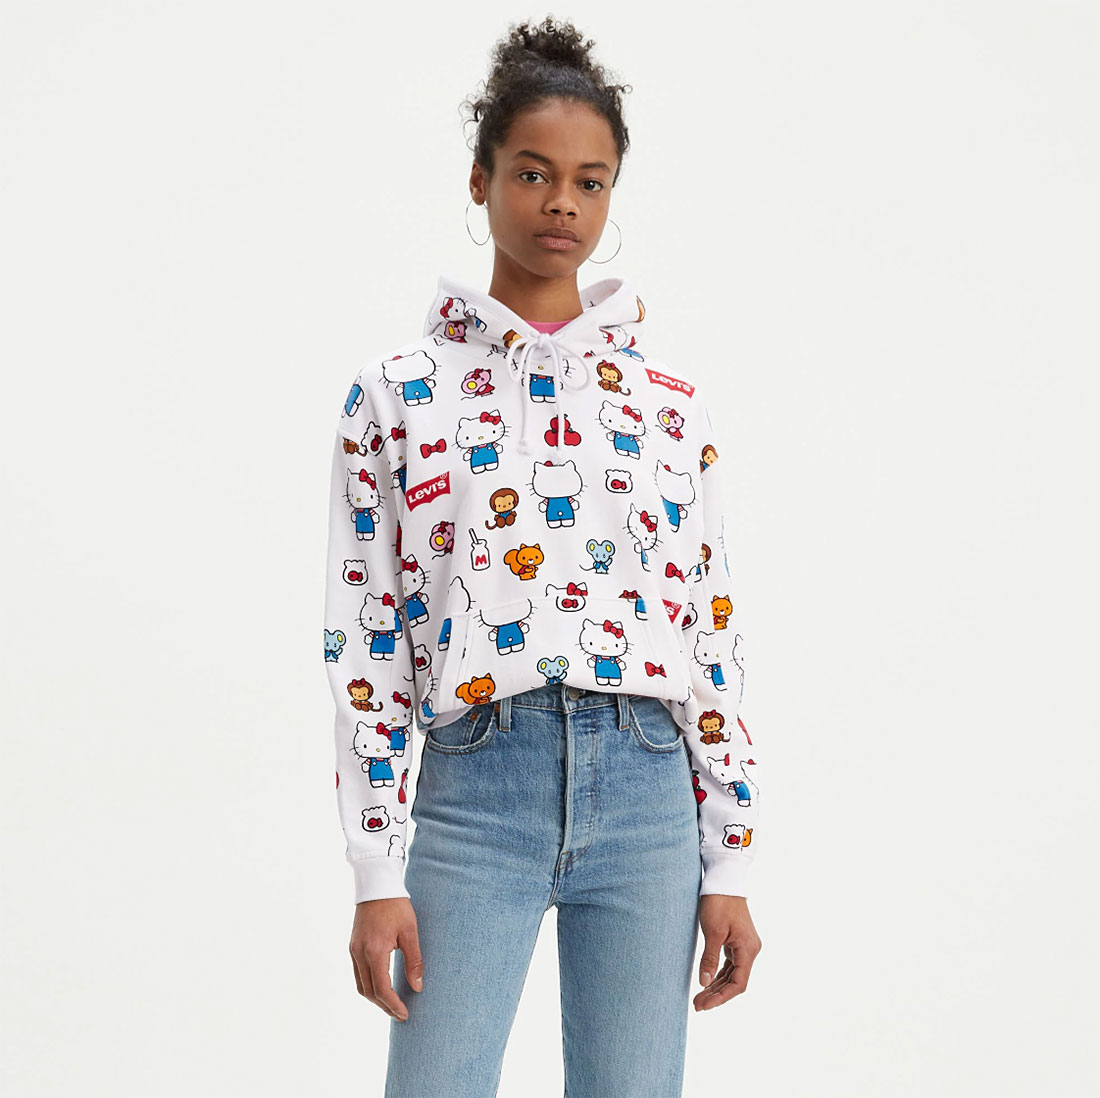 onderdelen solidariteit fiets Levi's x Hello Kitty Limited-Edition Collection 2019: Pics